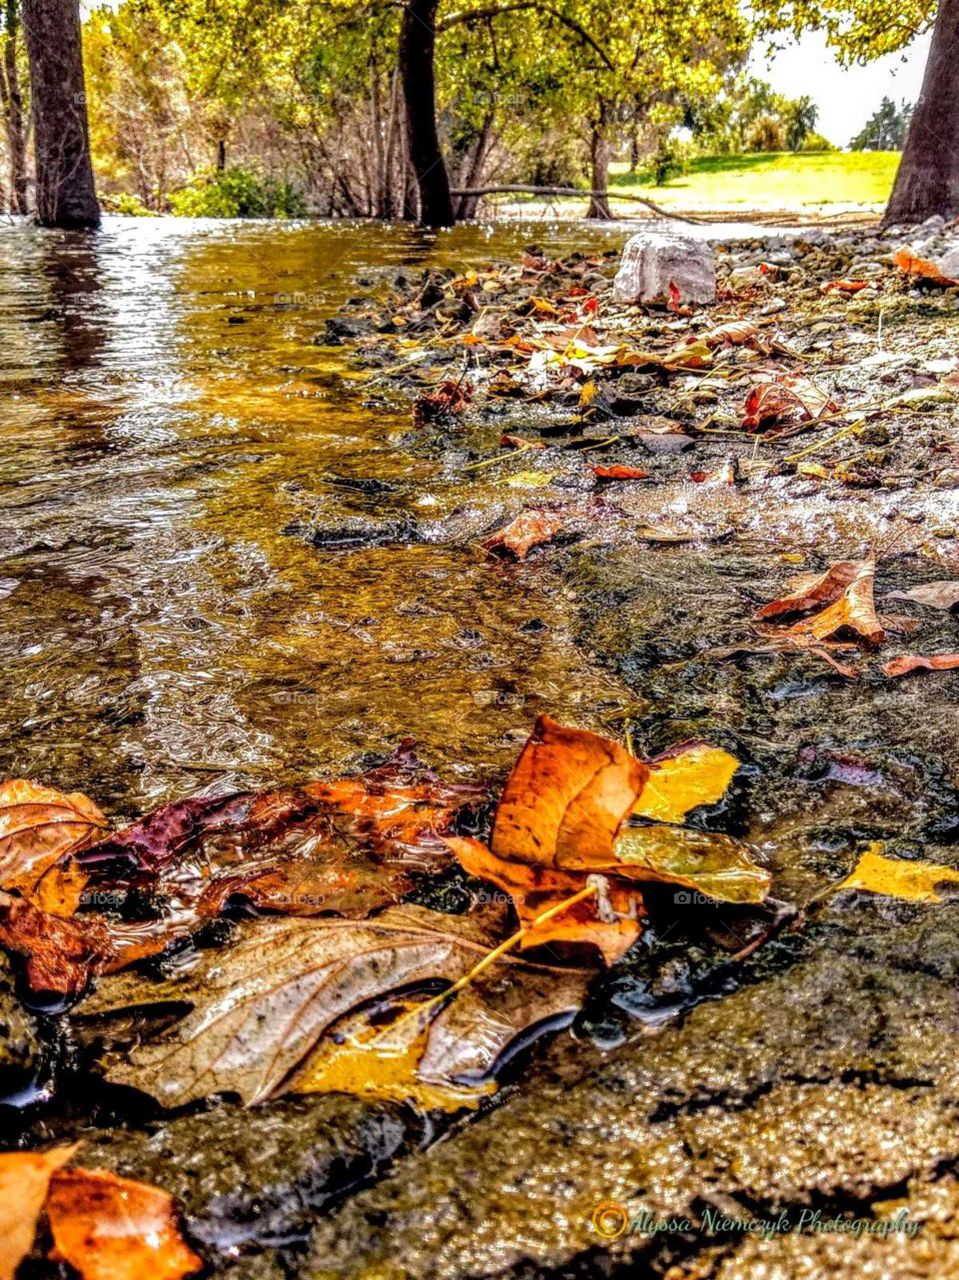 Beautiful Autumn blown leaves, kissed by the water "Reflect Awhile". Steady ripples, cozy breeze and nature.